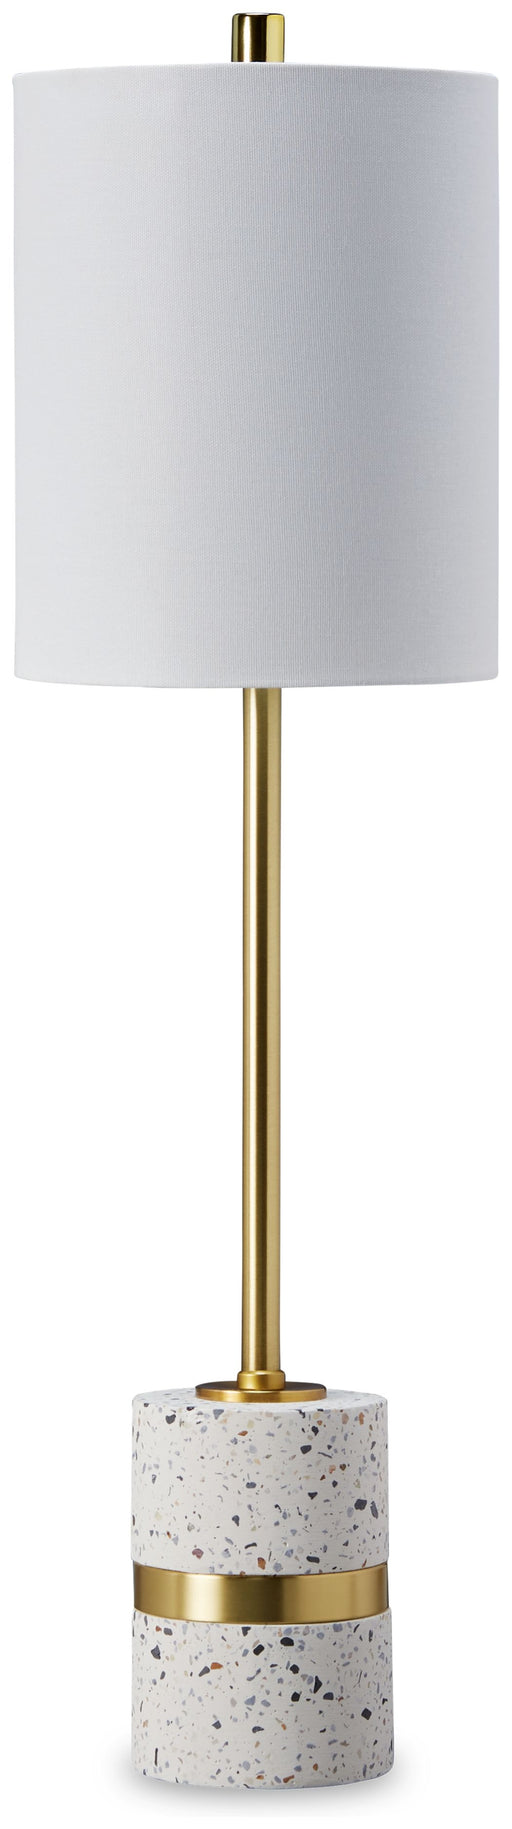 Maywick - White - Metal Table Lamp Cleveland Home Outlet (OH) - Furniture Store in Middleburg Heights Serving Cleveland, Strongsville, and Online